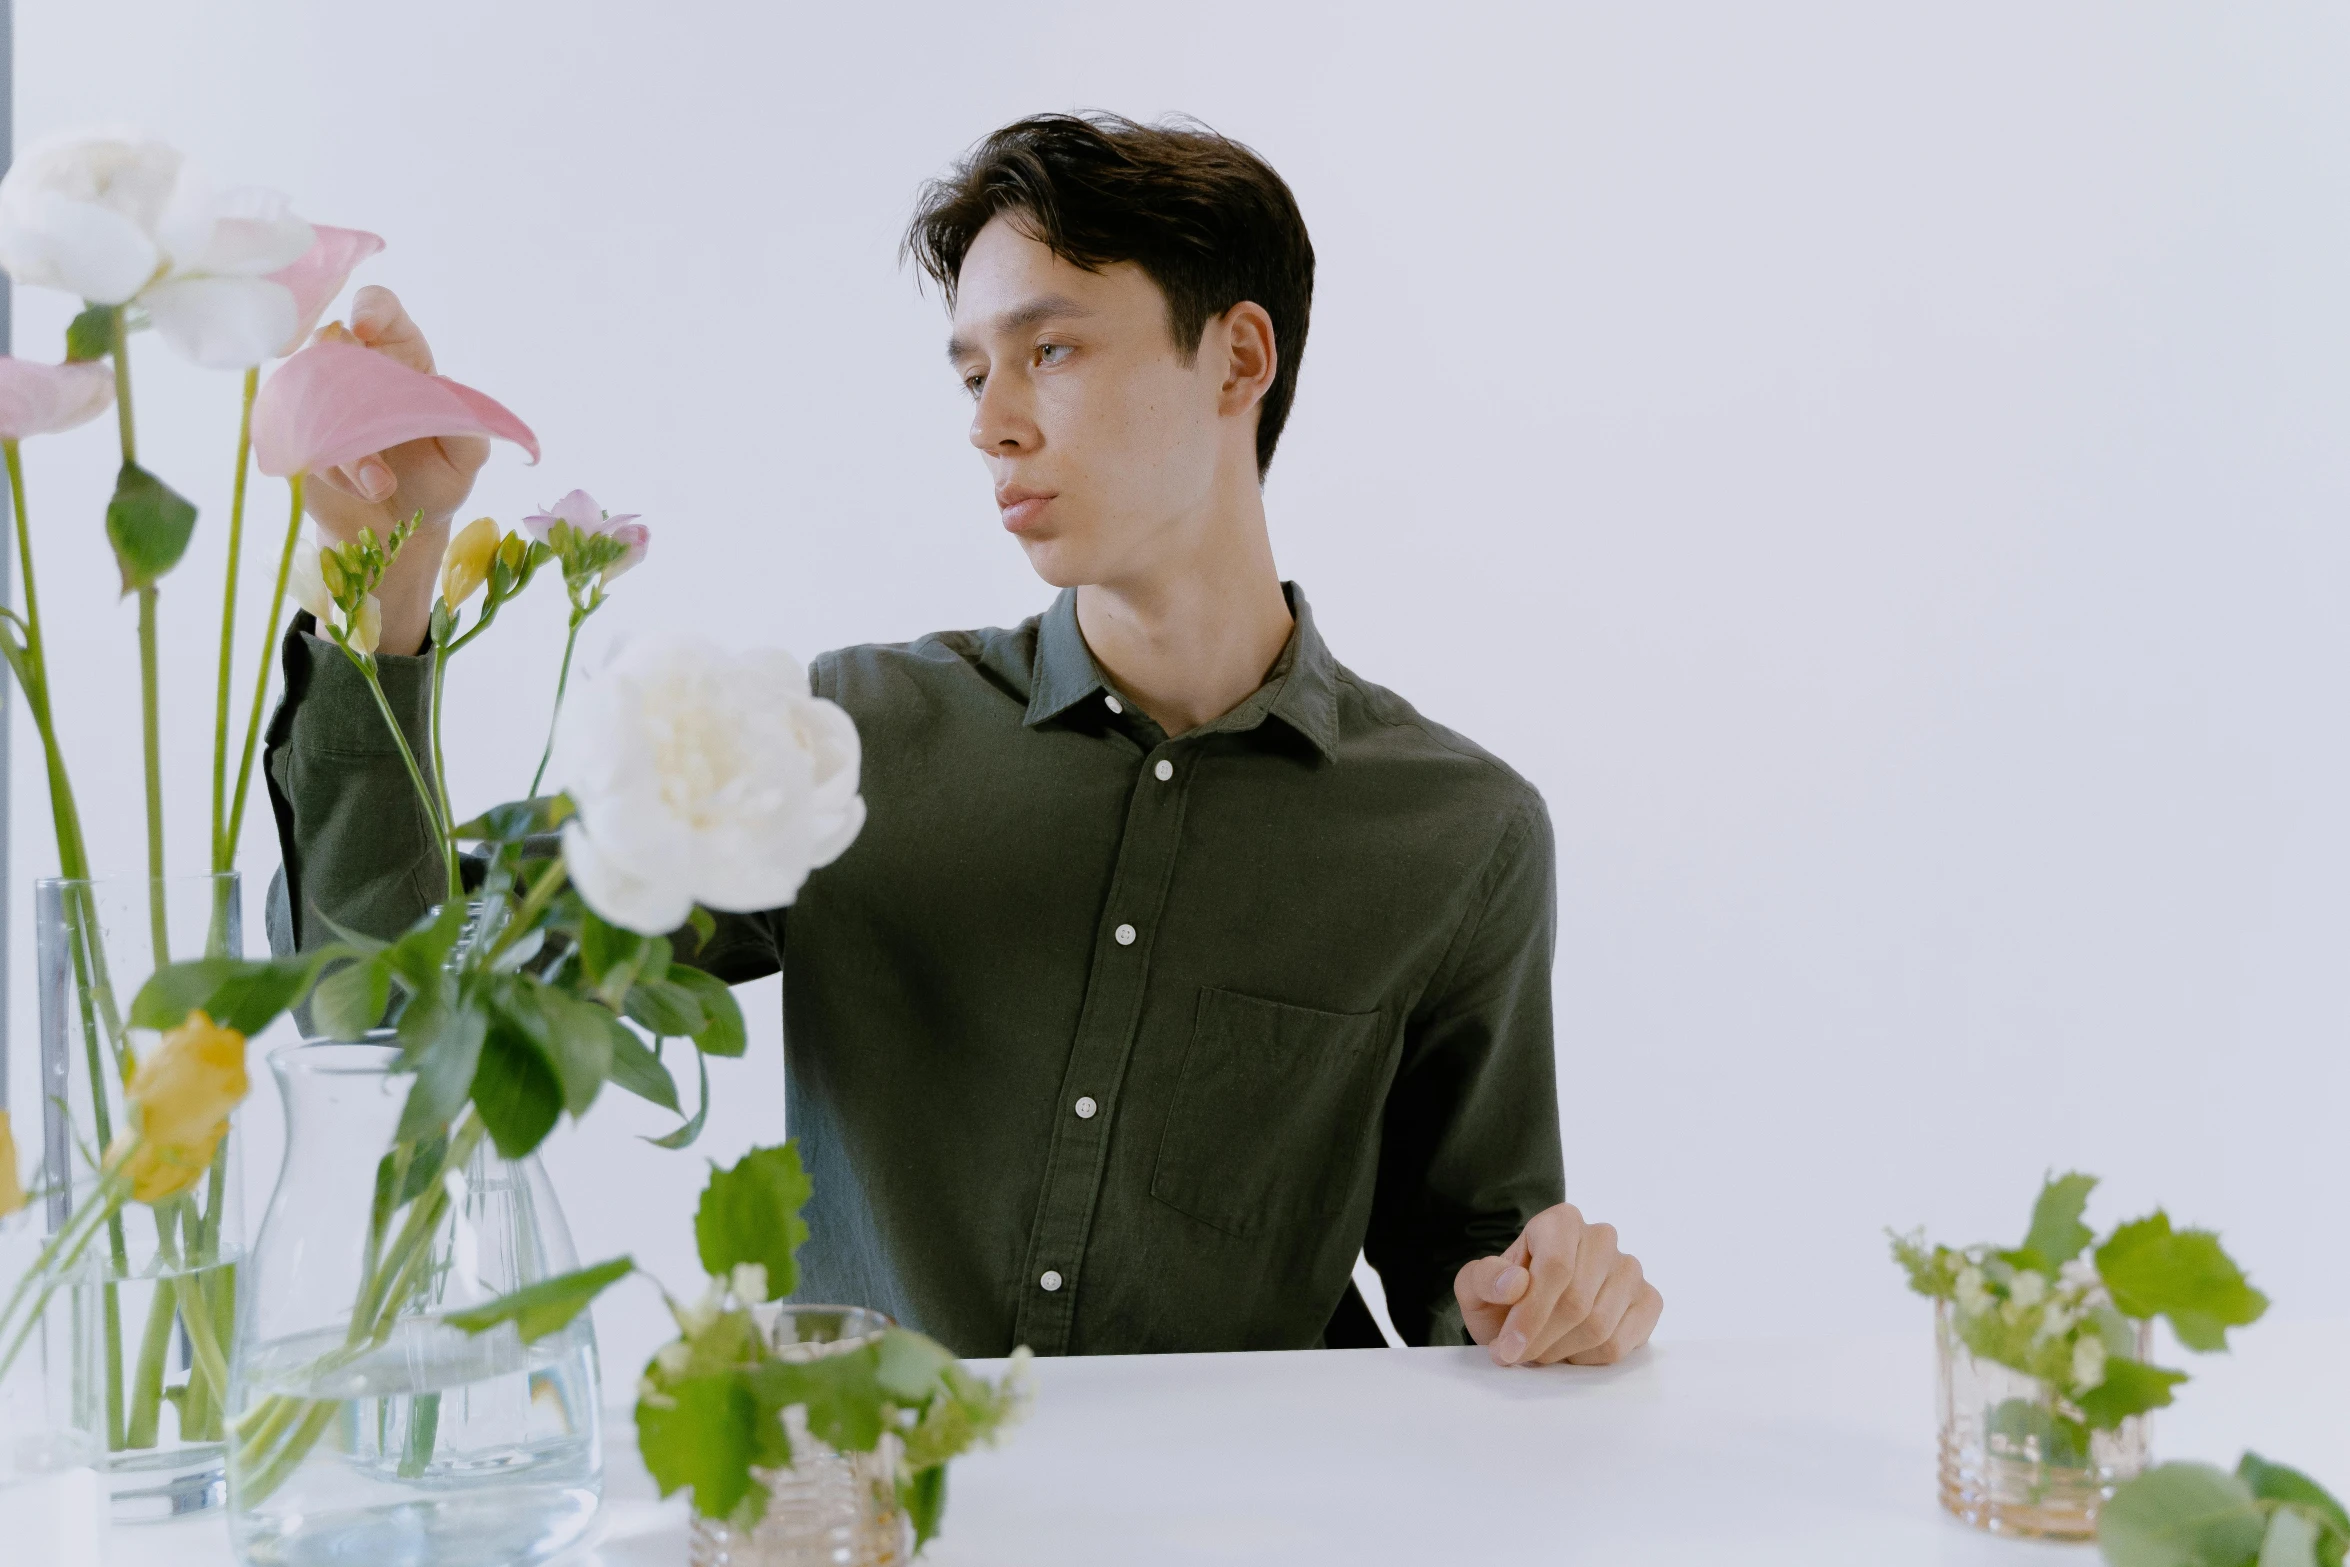 a man sitting at a table with flowers in vases, an album cover, inspired by Fei Danxu, in a dark green polo shirt, button up shirt, picking up a flower, well-groomed model